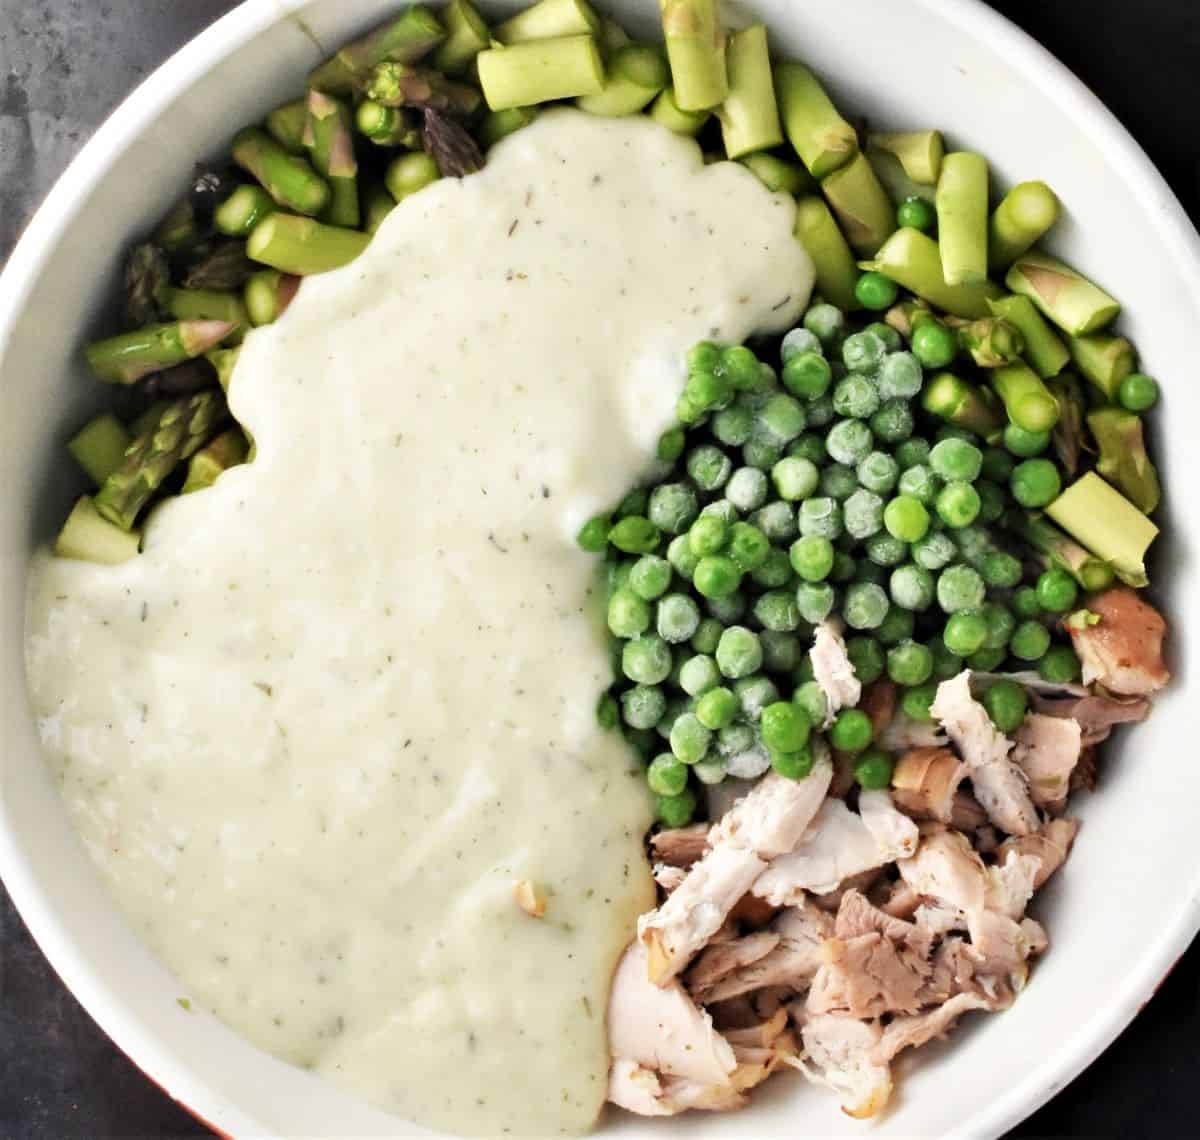 Chopped chicken, asparagus, peas and creamy sauce in large bowl.